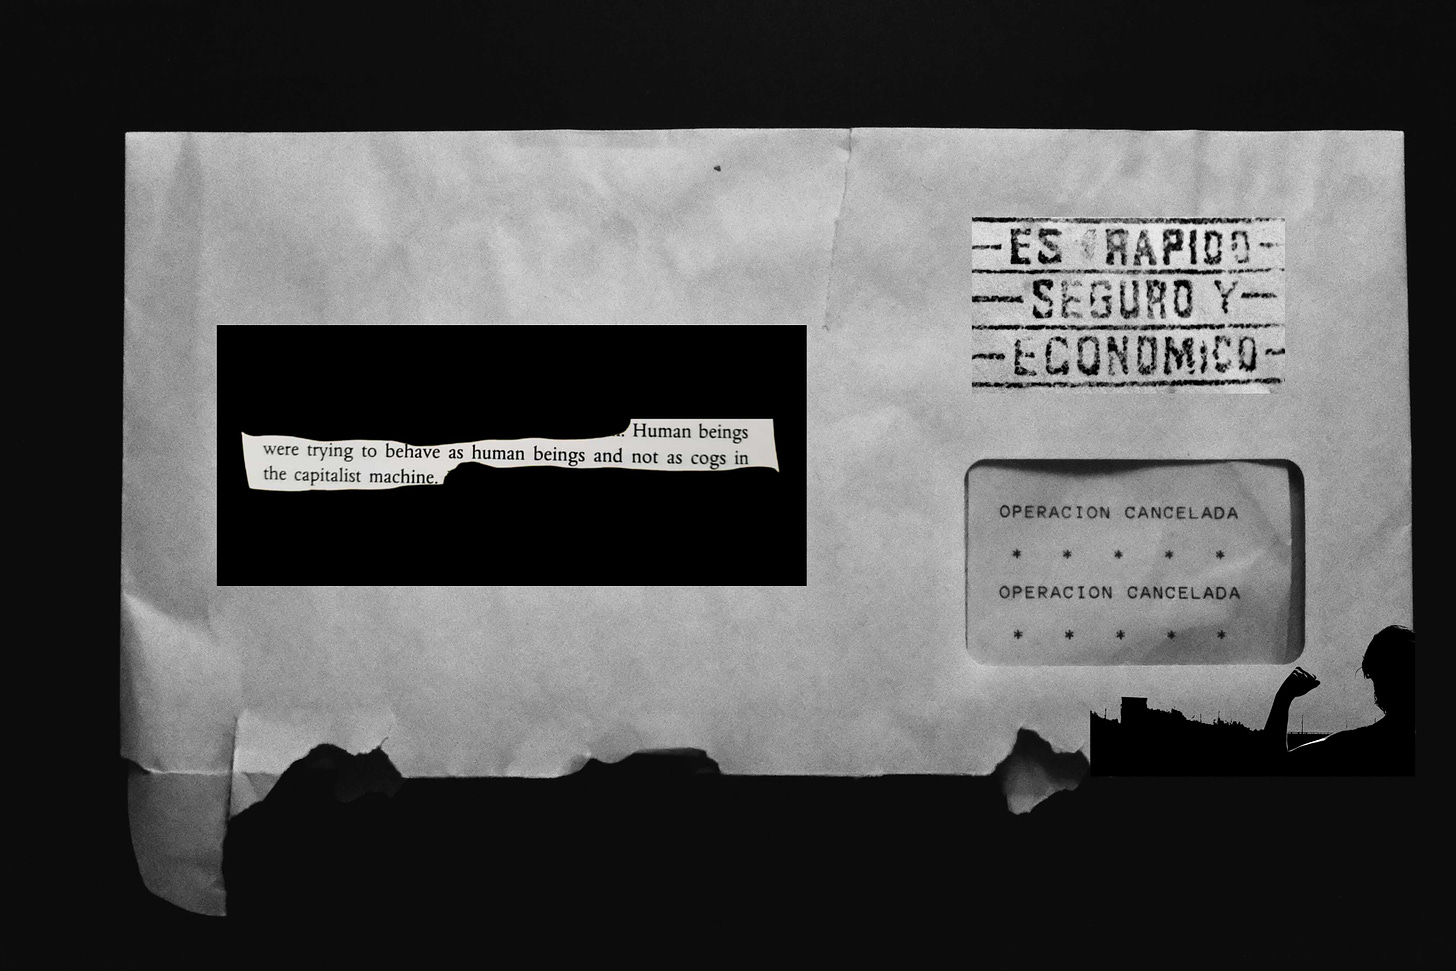 A black and white collage of a letter which has the words "operación cancelada" in the part where you usually see the address. On the front is printed, "es rápido, seguro y económico". On the left is written, "Human beings were trying to behave as human beings and not as cogs in the capitalist machine."